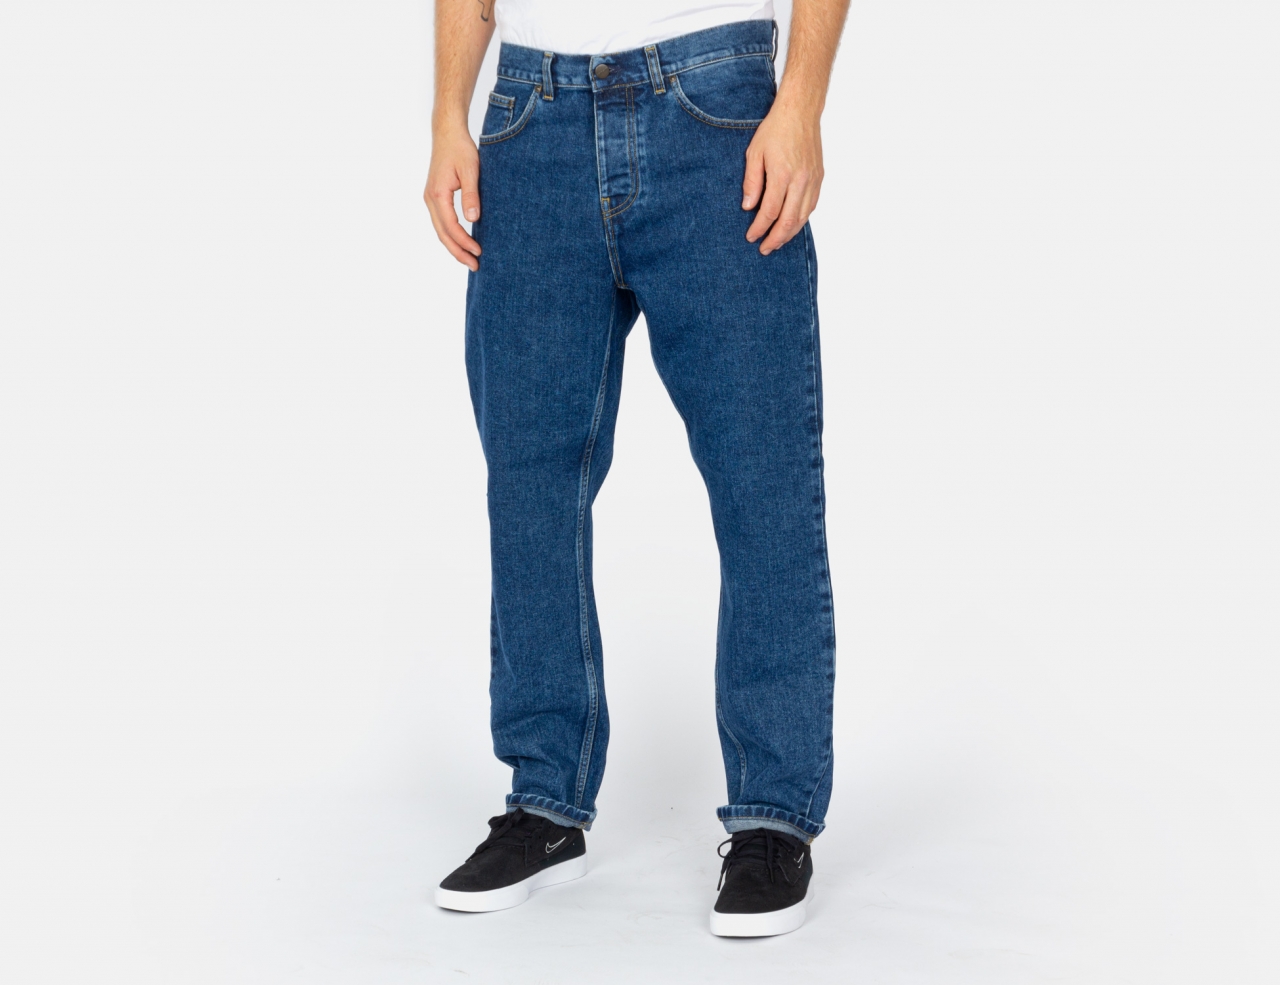 Carhartt WIP Newel Pant - Blue Stoned Washed